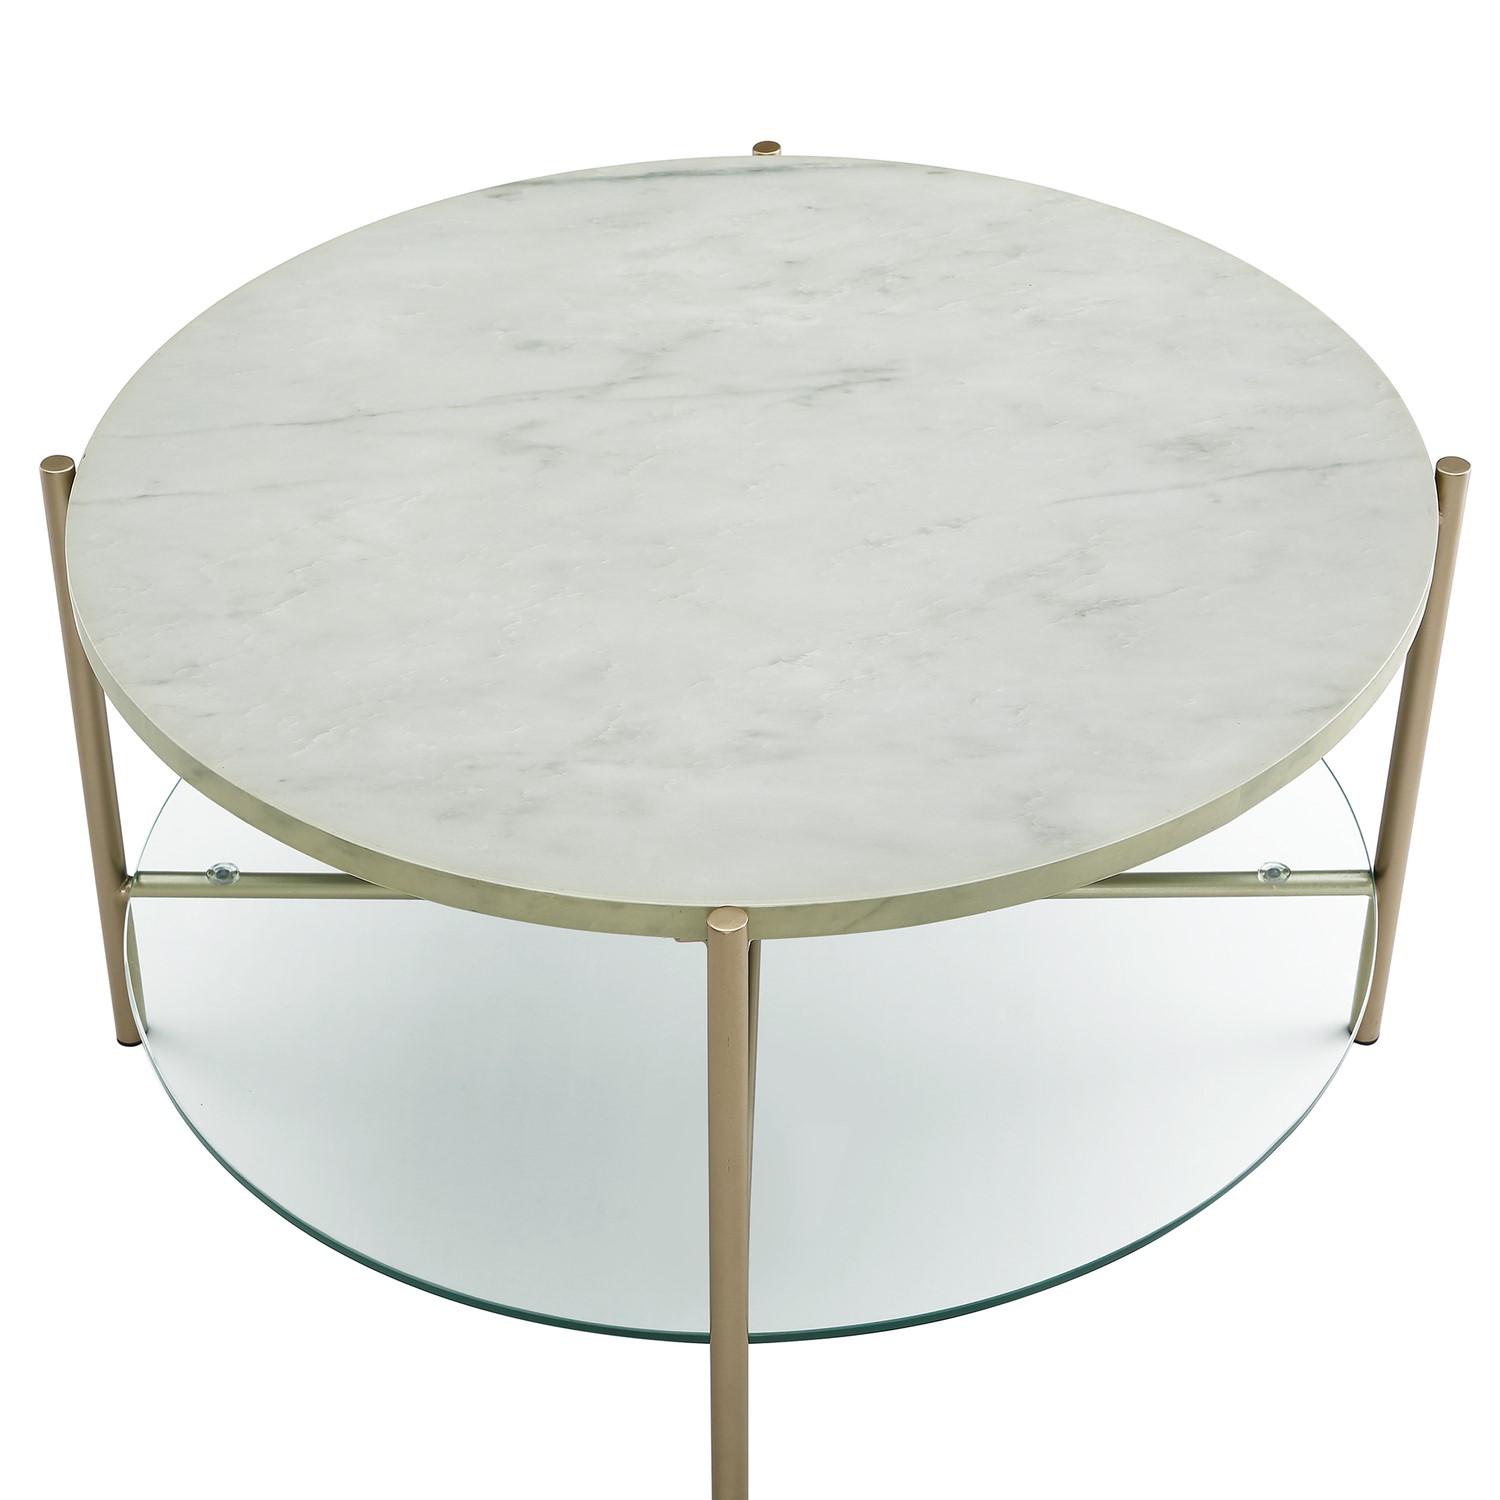 White Faux Marble Round Coffee Table, Round Coffee Table With Glass Top And Shelf